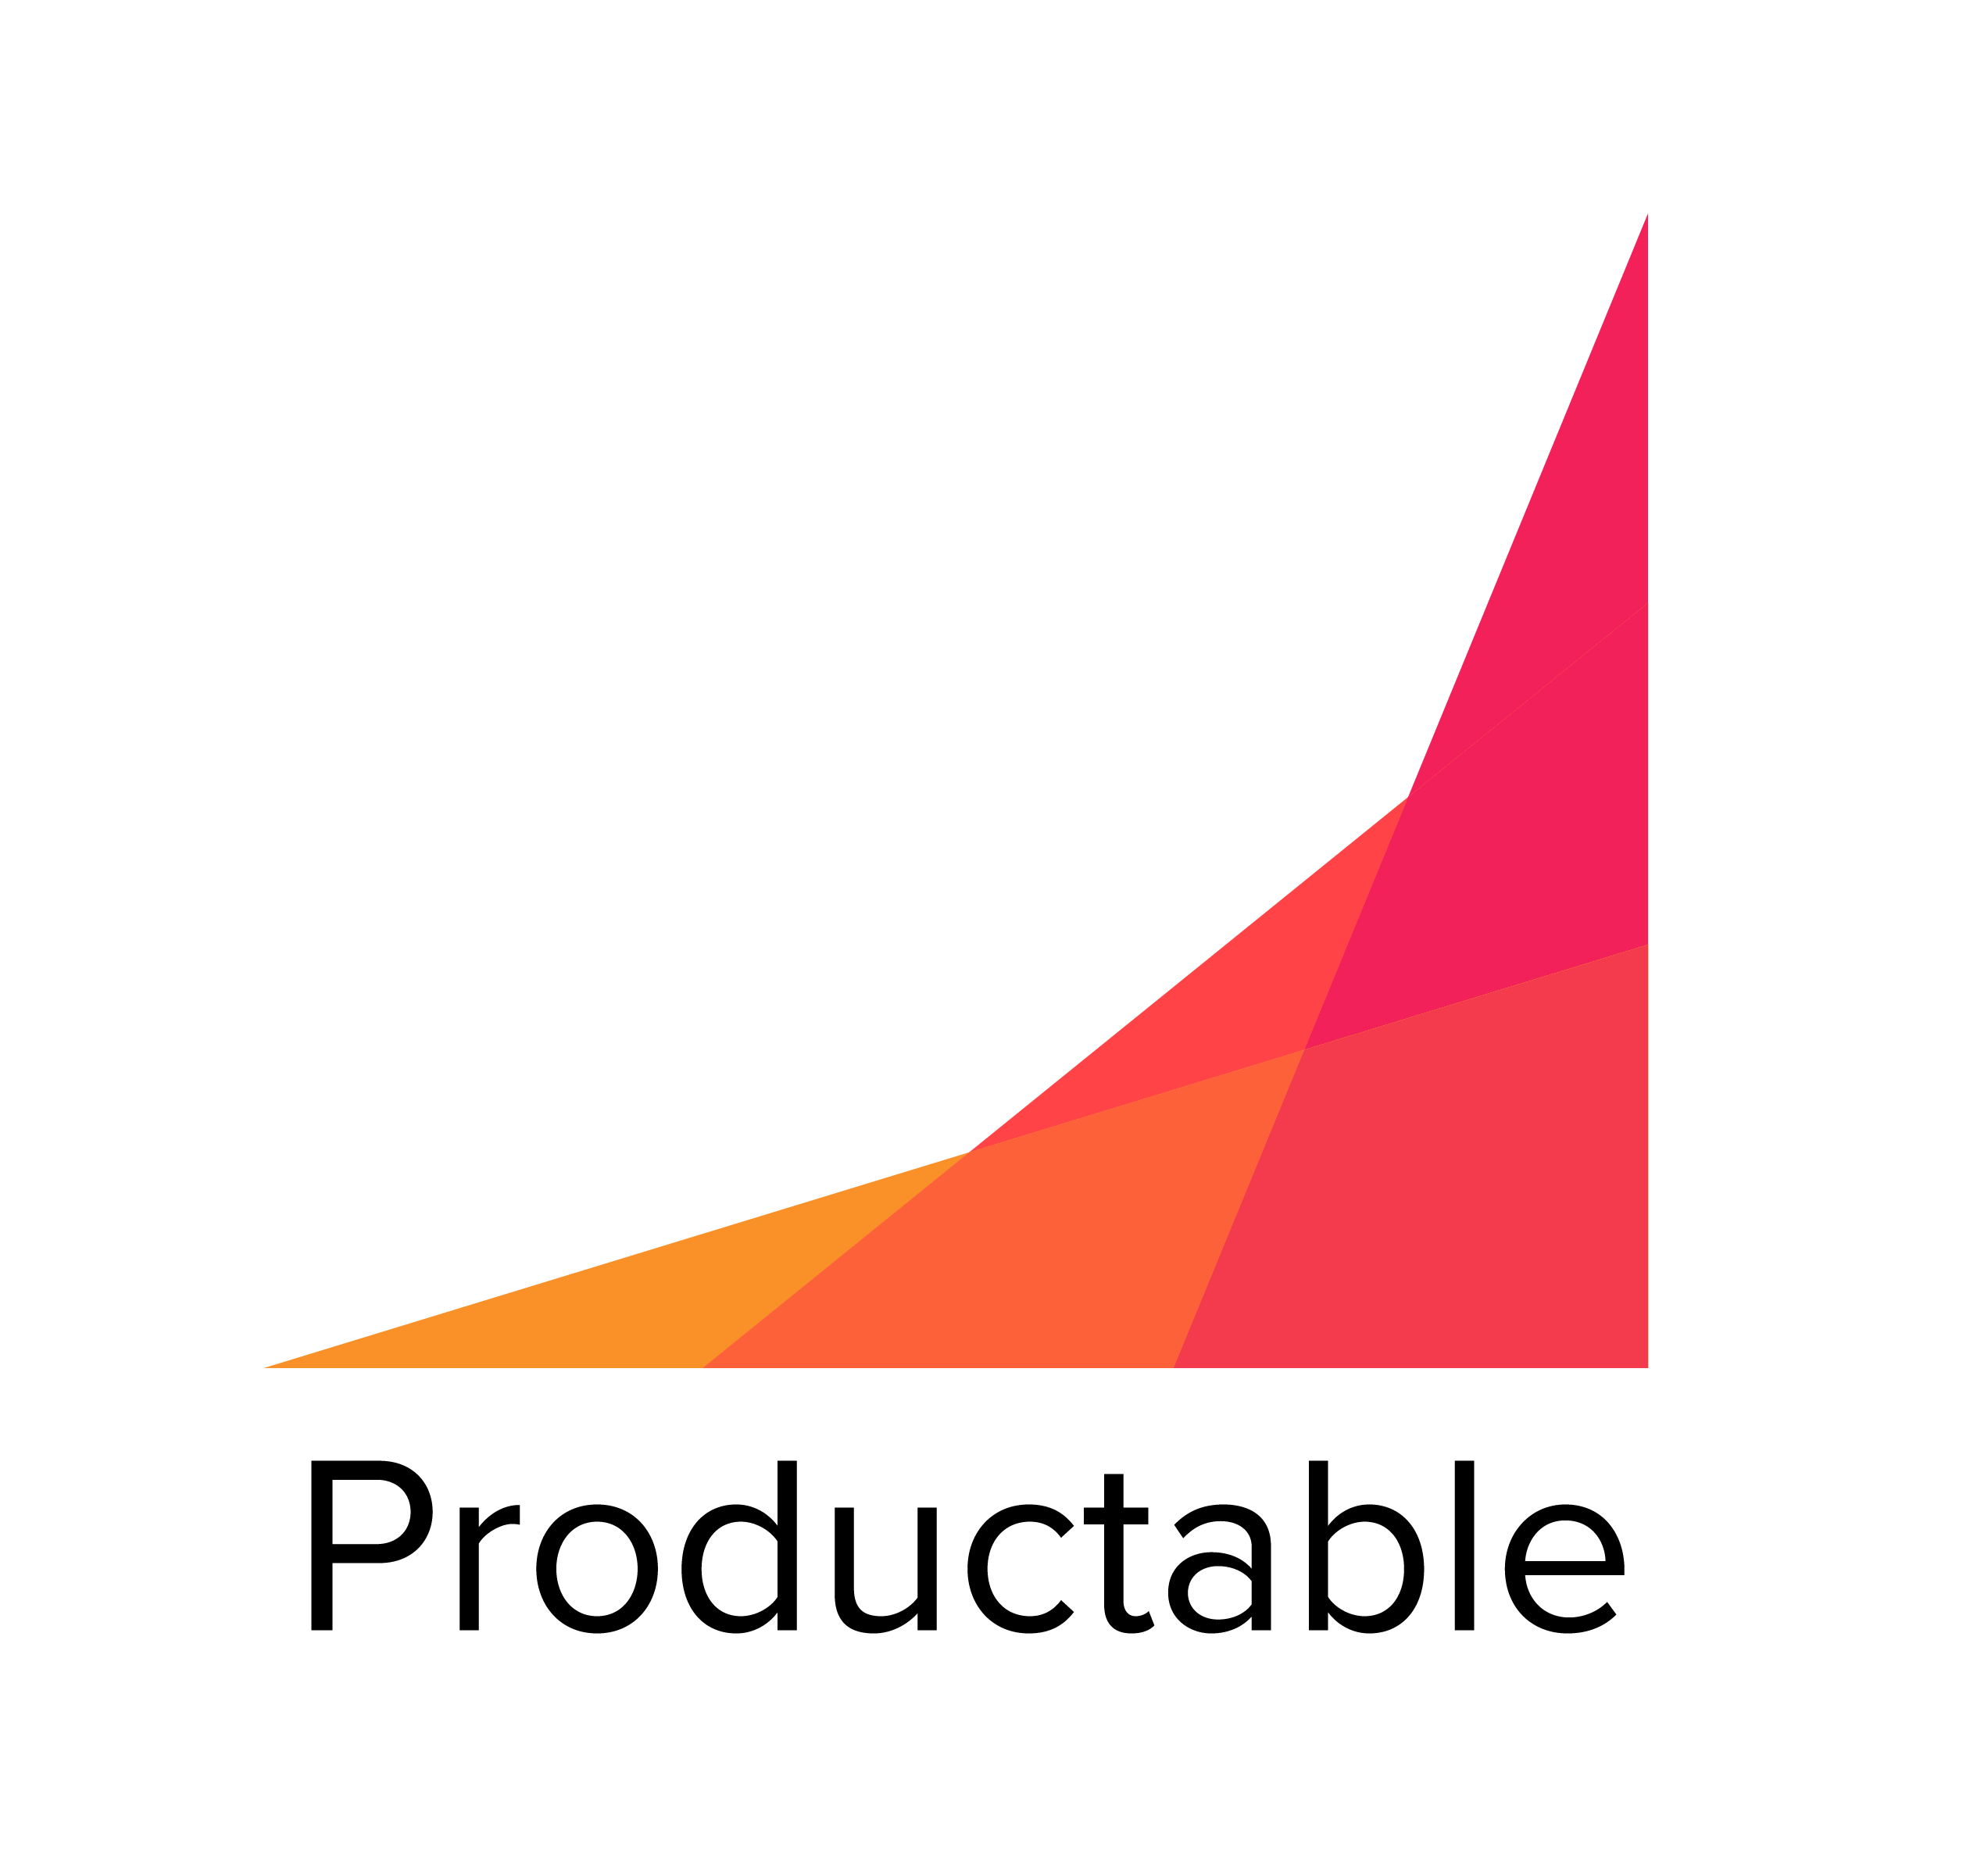 Productable